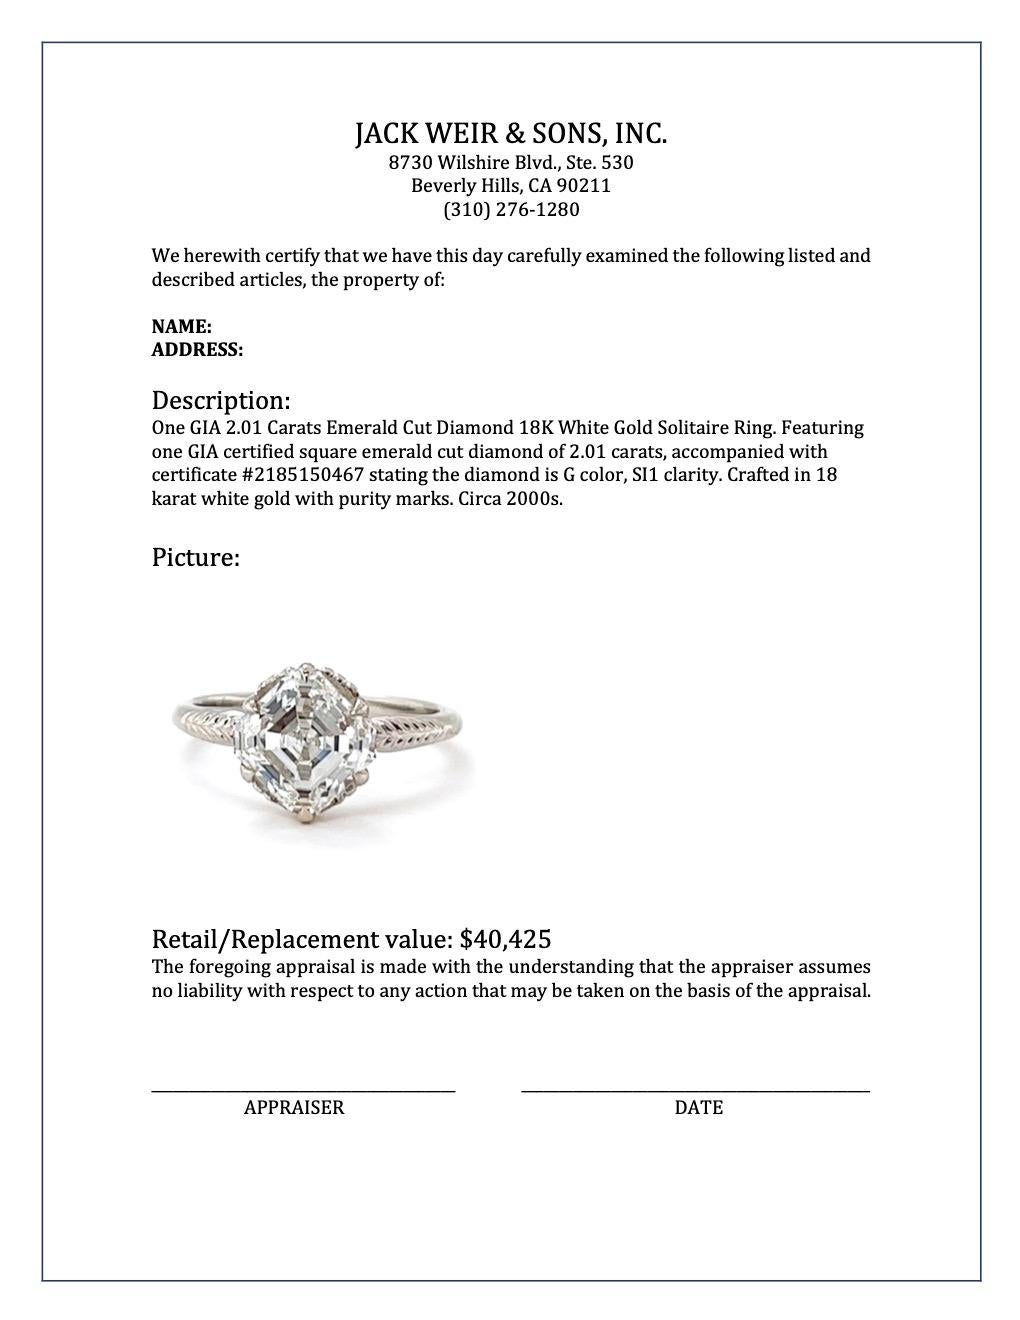 GIA 2.01 Carats Emerald Cut Diamond 18K White Gold Solitaire Ring 4